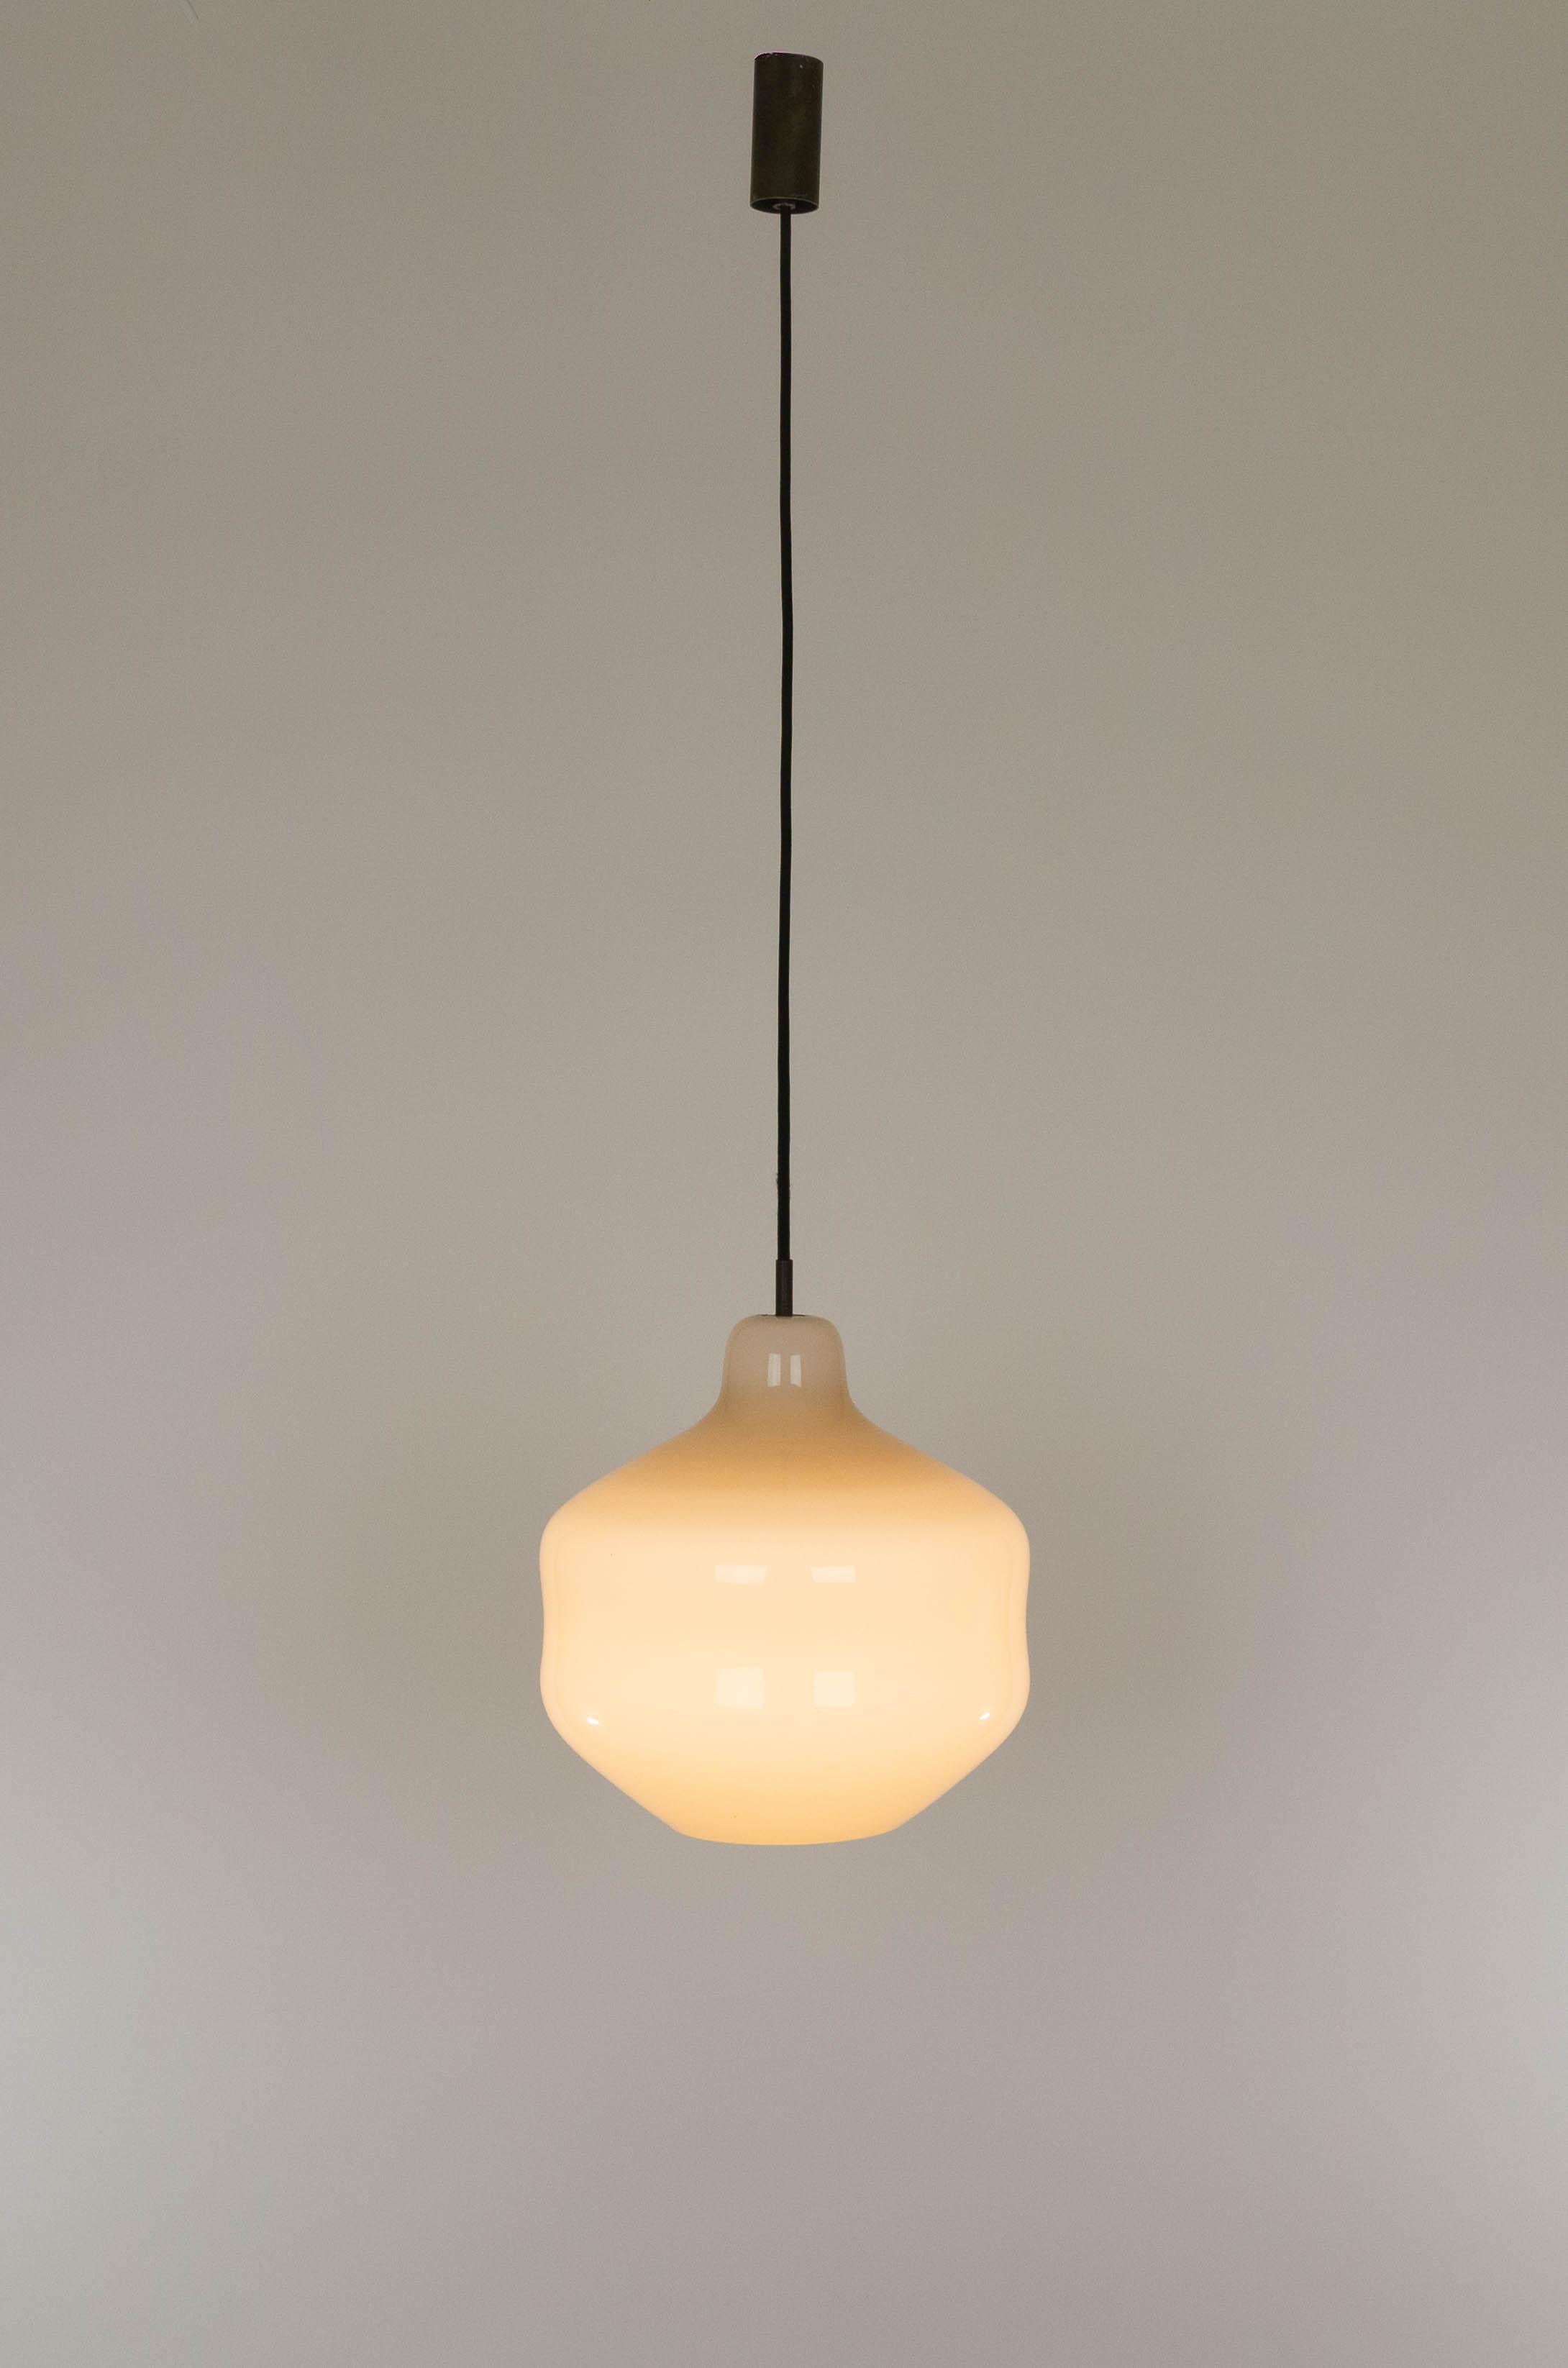 Hand-blown glass pendant designed by Massimo Vignelli at the start of his impressive career in design and executed by Murano glass specialist Venini. 

The color of the lamp is light beige, turning to yellow or white when switched on, depending on